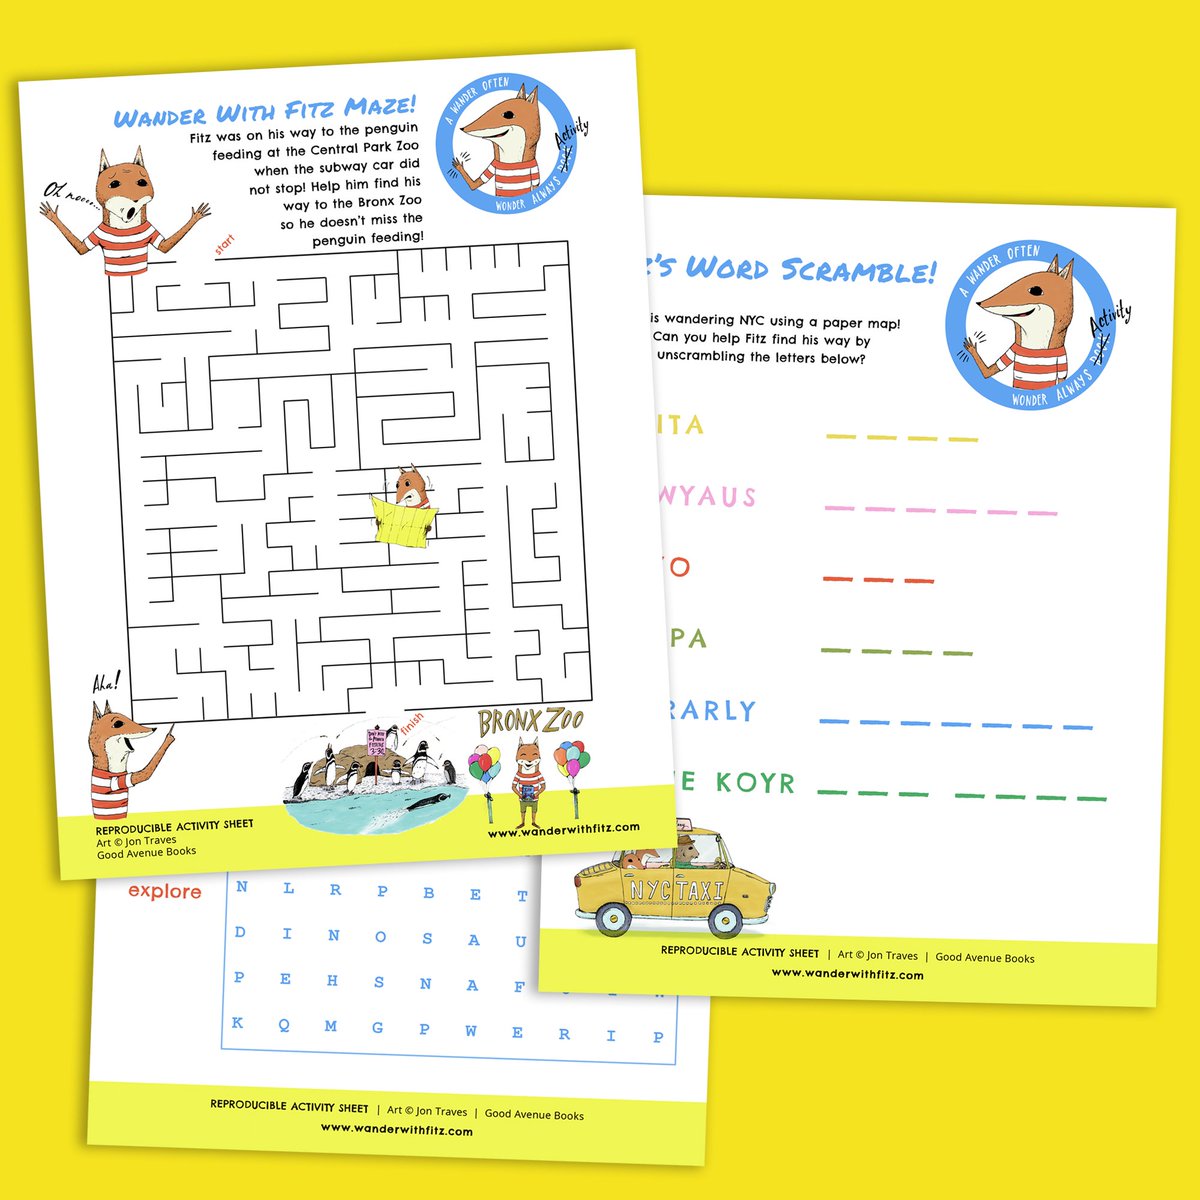 Free printable activity sheets to go with the WANDER NEW YORK: FITZ IN THE CITY picture book about New York City.

Download on my website!
.
.
.
#freedownload #freebookresources #activitysheets